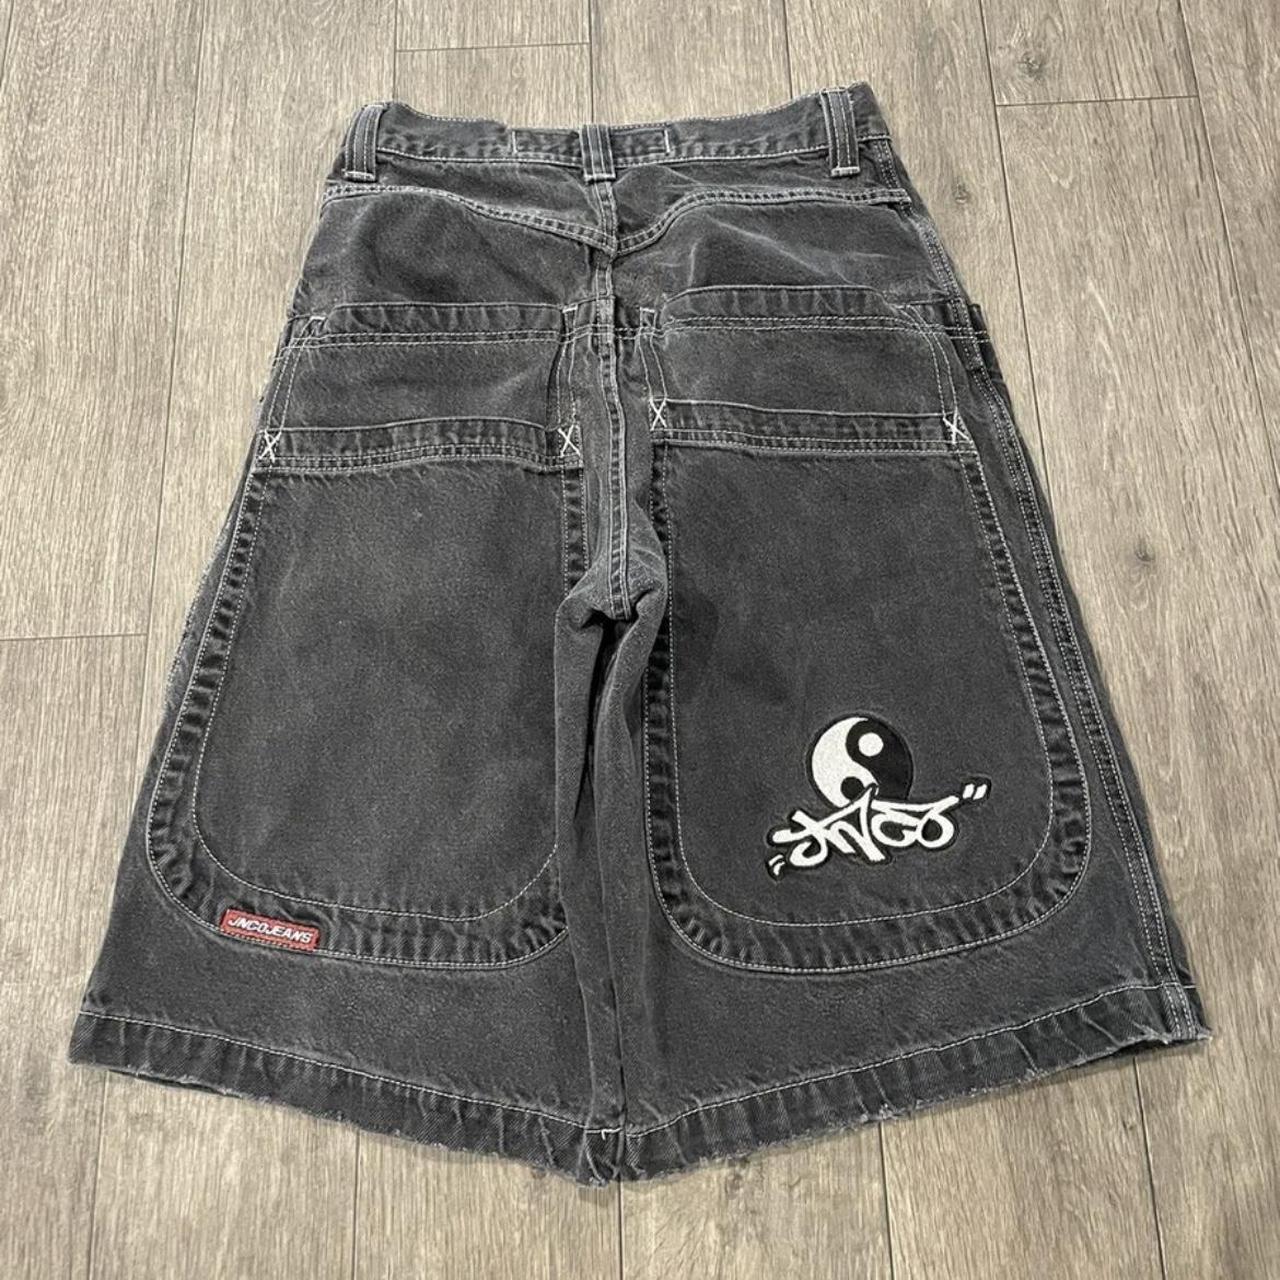 Jnco yin Yang shorts size 30 Fits me and I’m a 32... - Depop